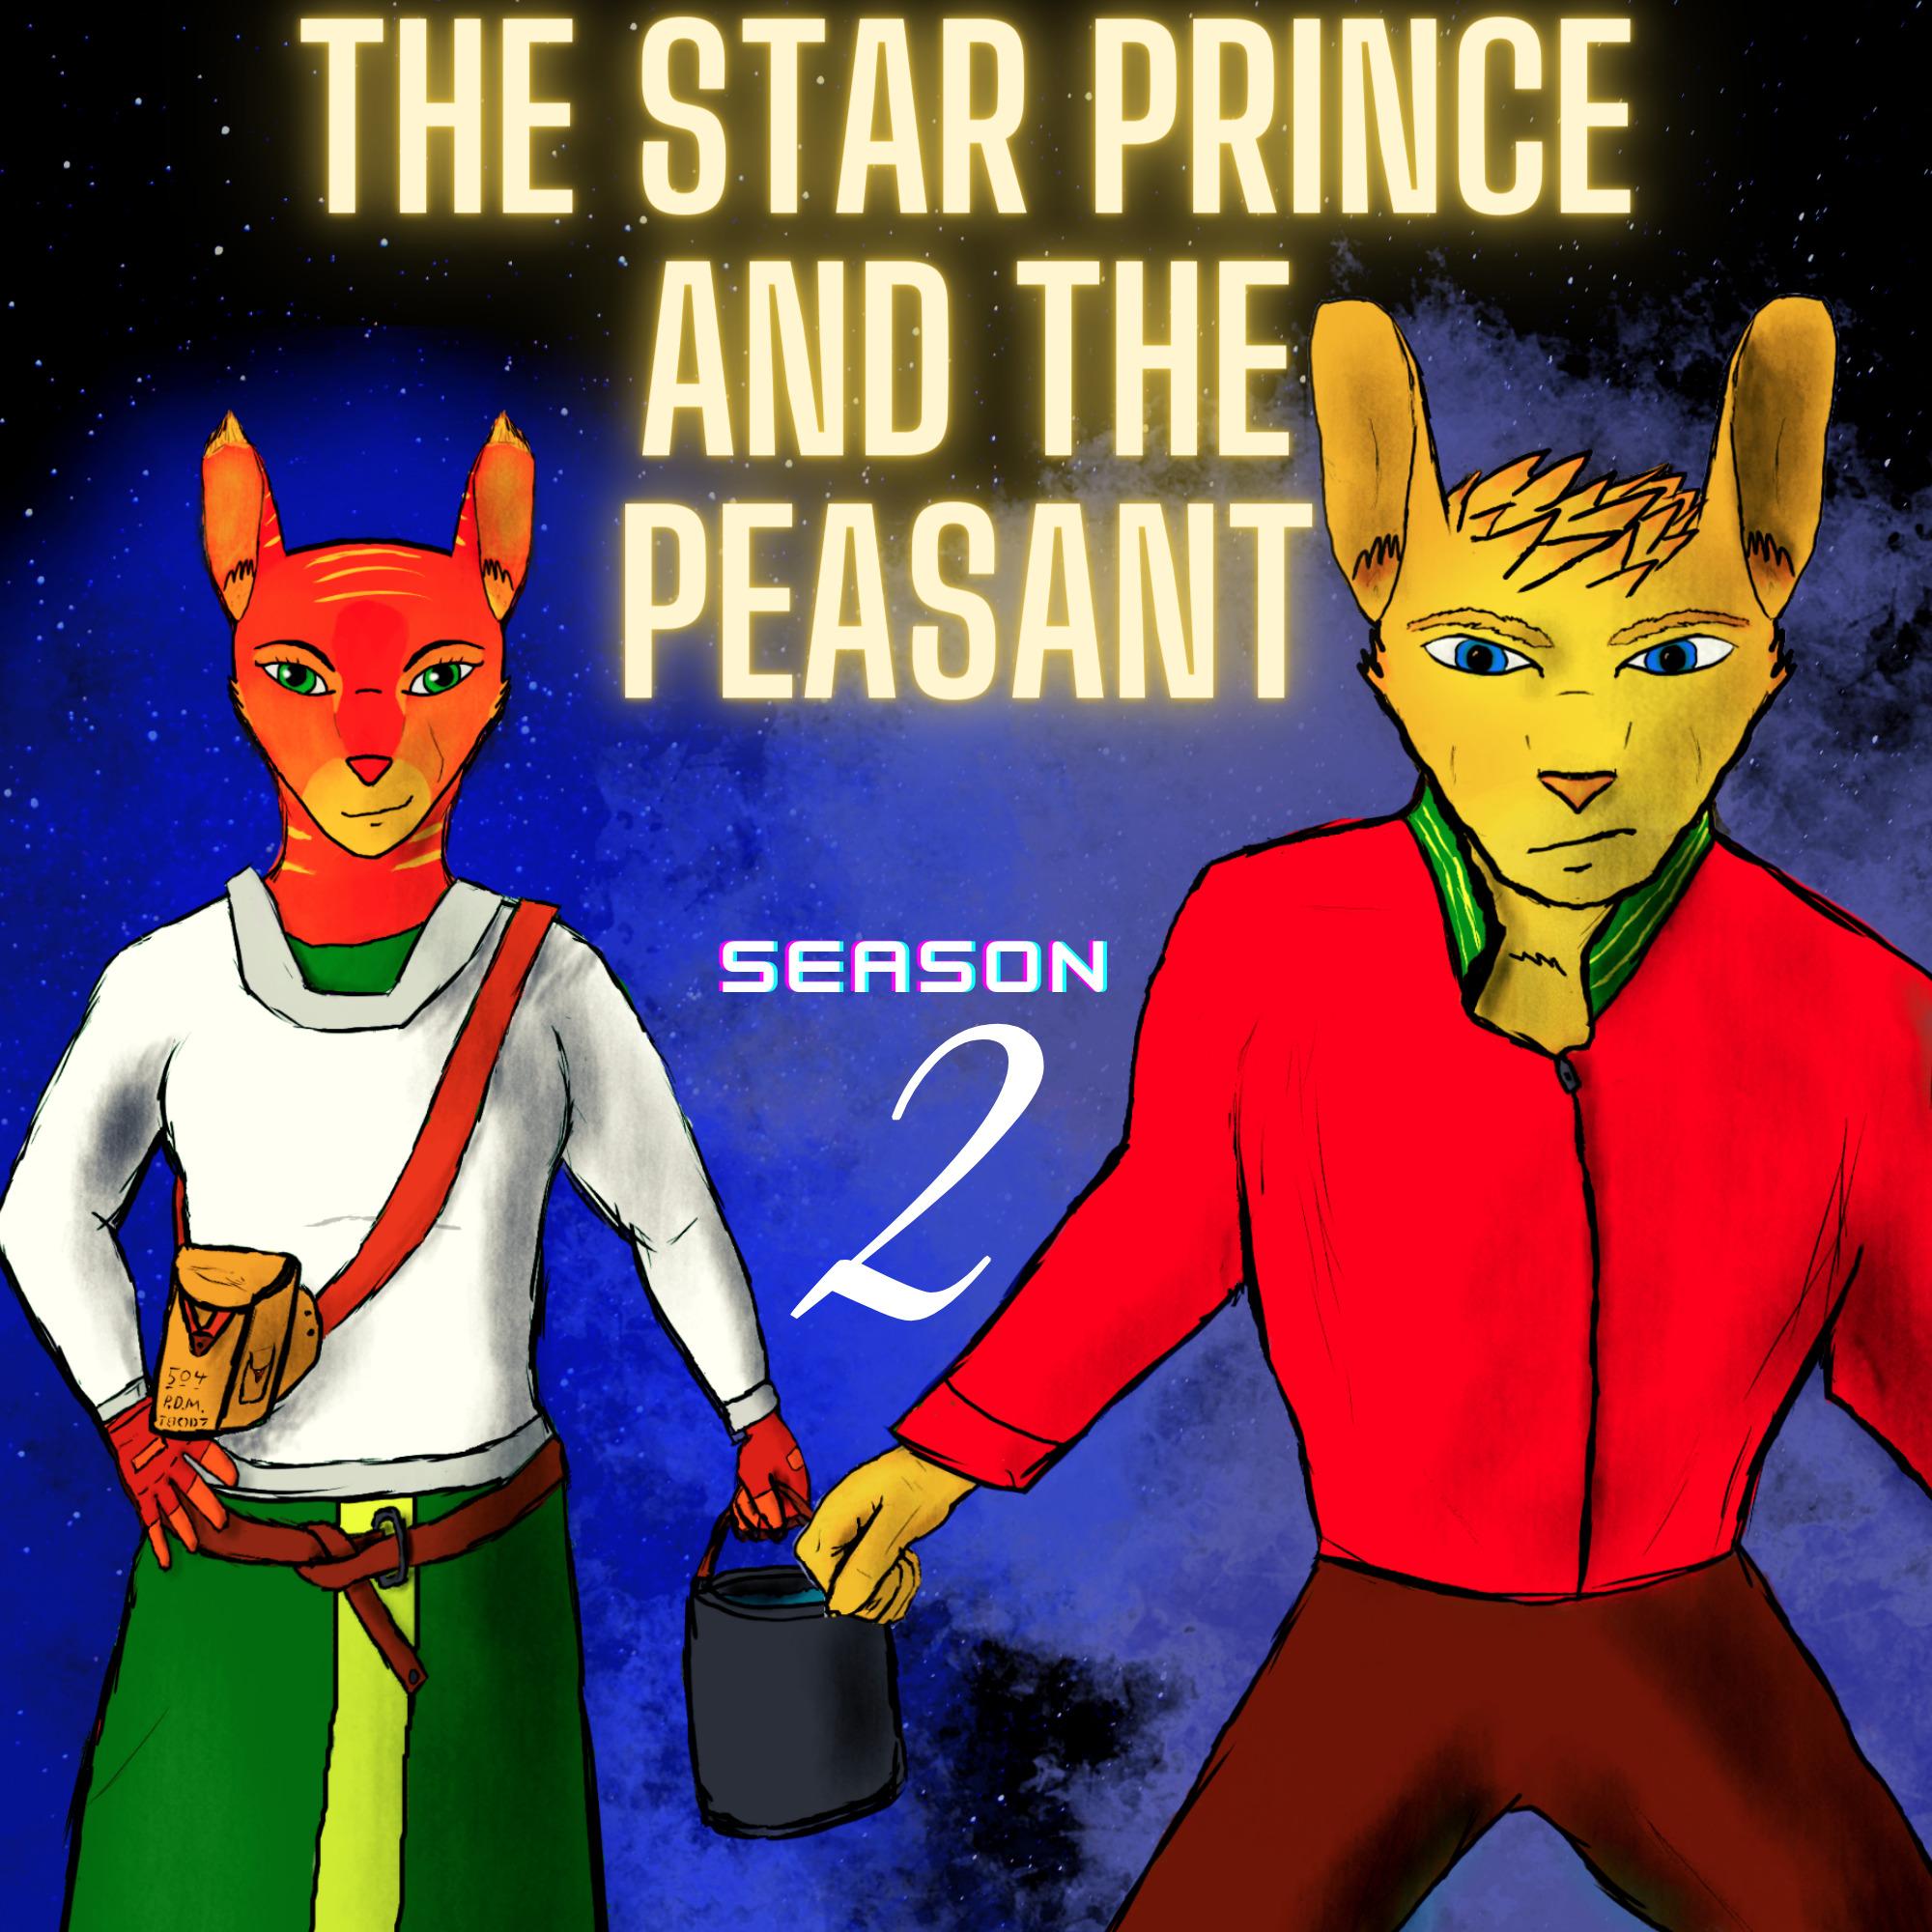 The Star Prince and the Peasant